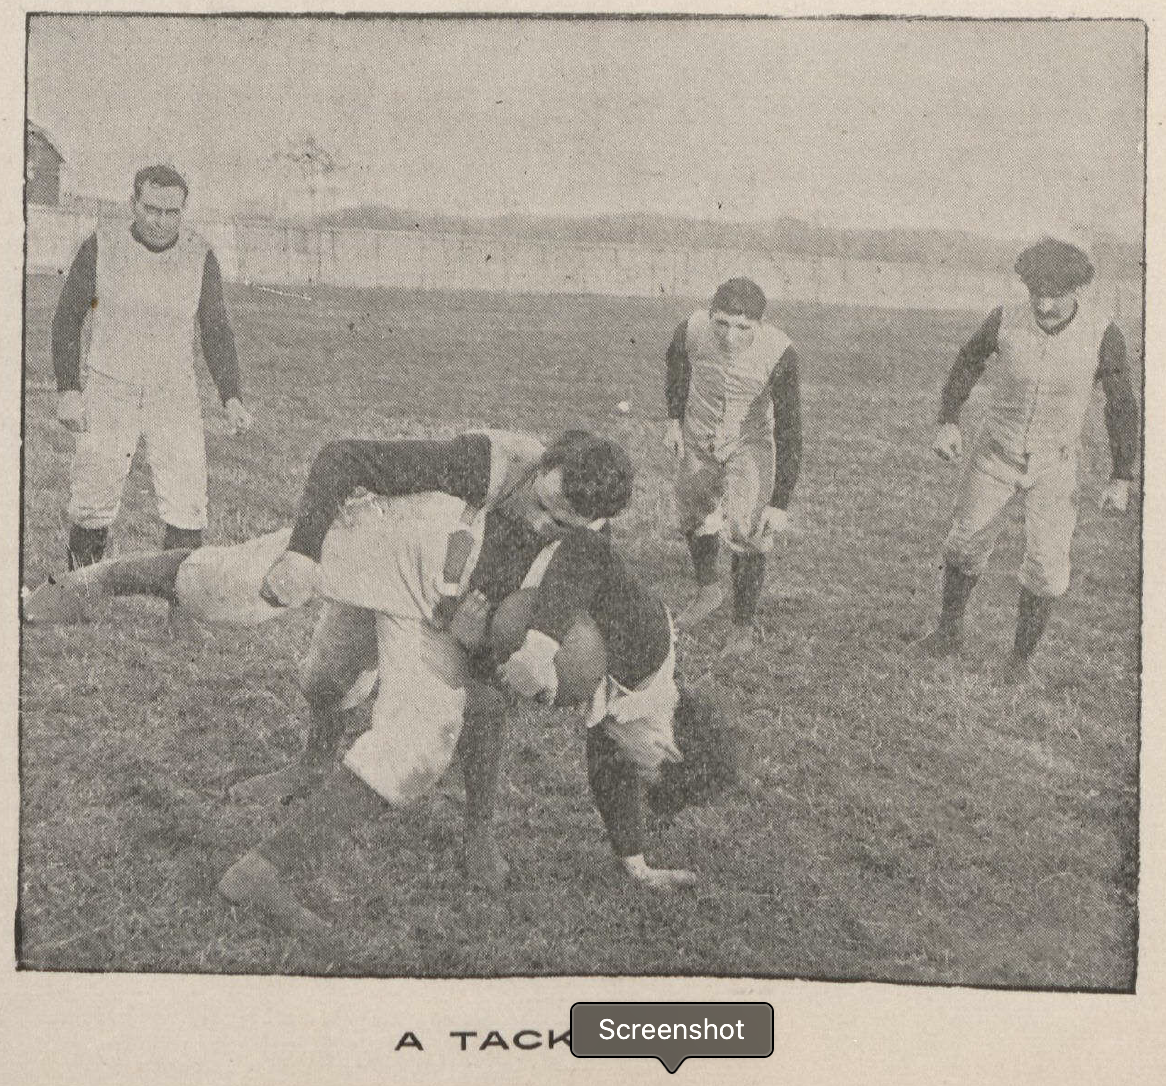 Five men on the football field, one is tackling another while three look on. Text at bottom reads "a tackle."